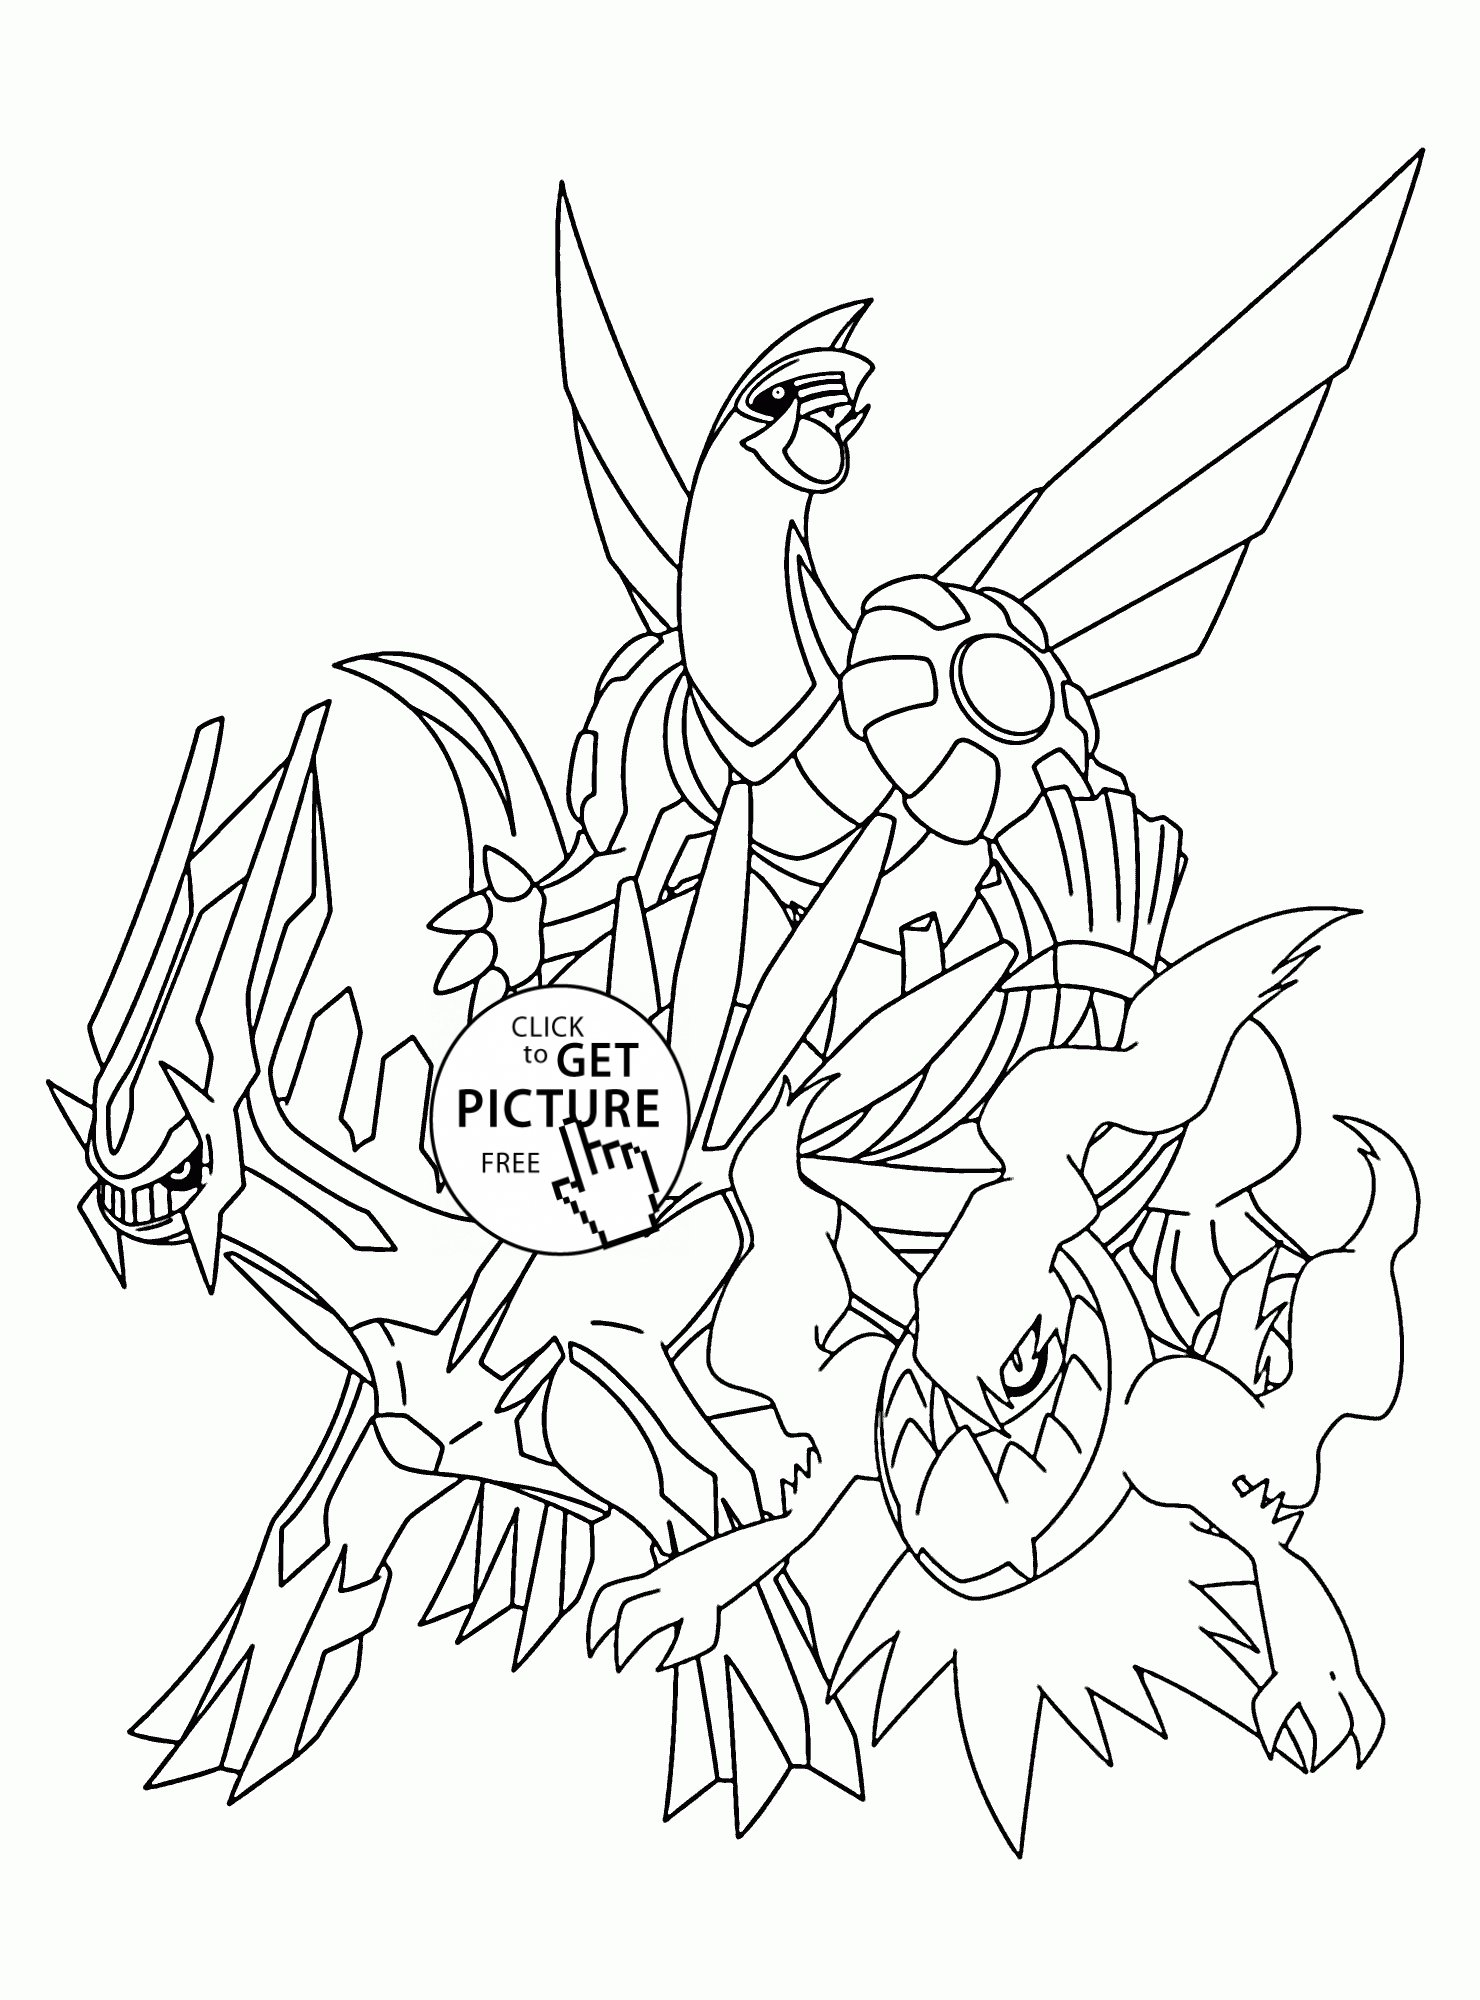 Giratina Coloring Pages Limited Legendary Pokemon Colouring Pages 11 49990